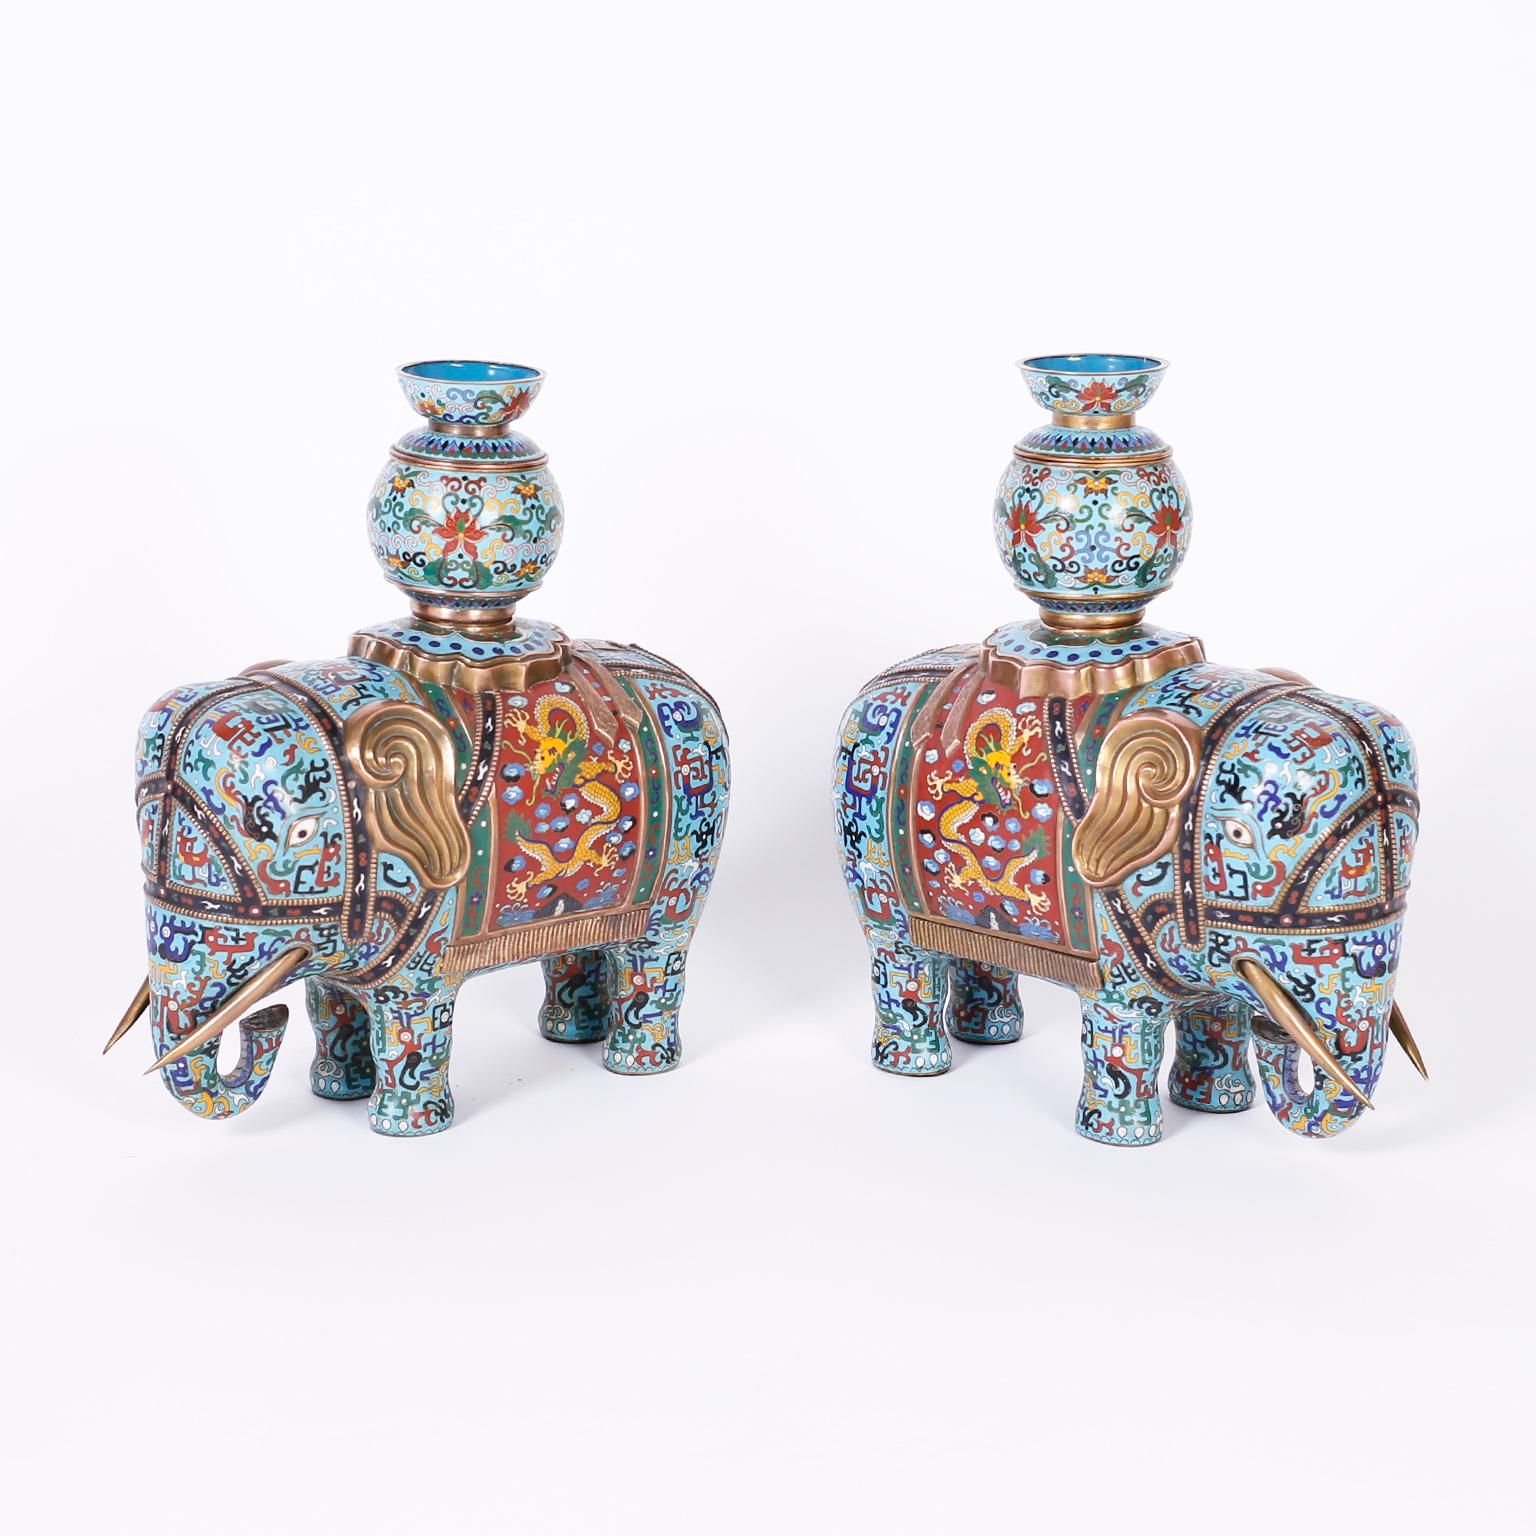 Pair of antique Chinese cloisonné or enamel on copper elephants decorated with colorful geometric symbols over an alluring blue background and contrasting saddle blanket with a gold dragon, the incense burner tops are conveniently removable.